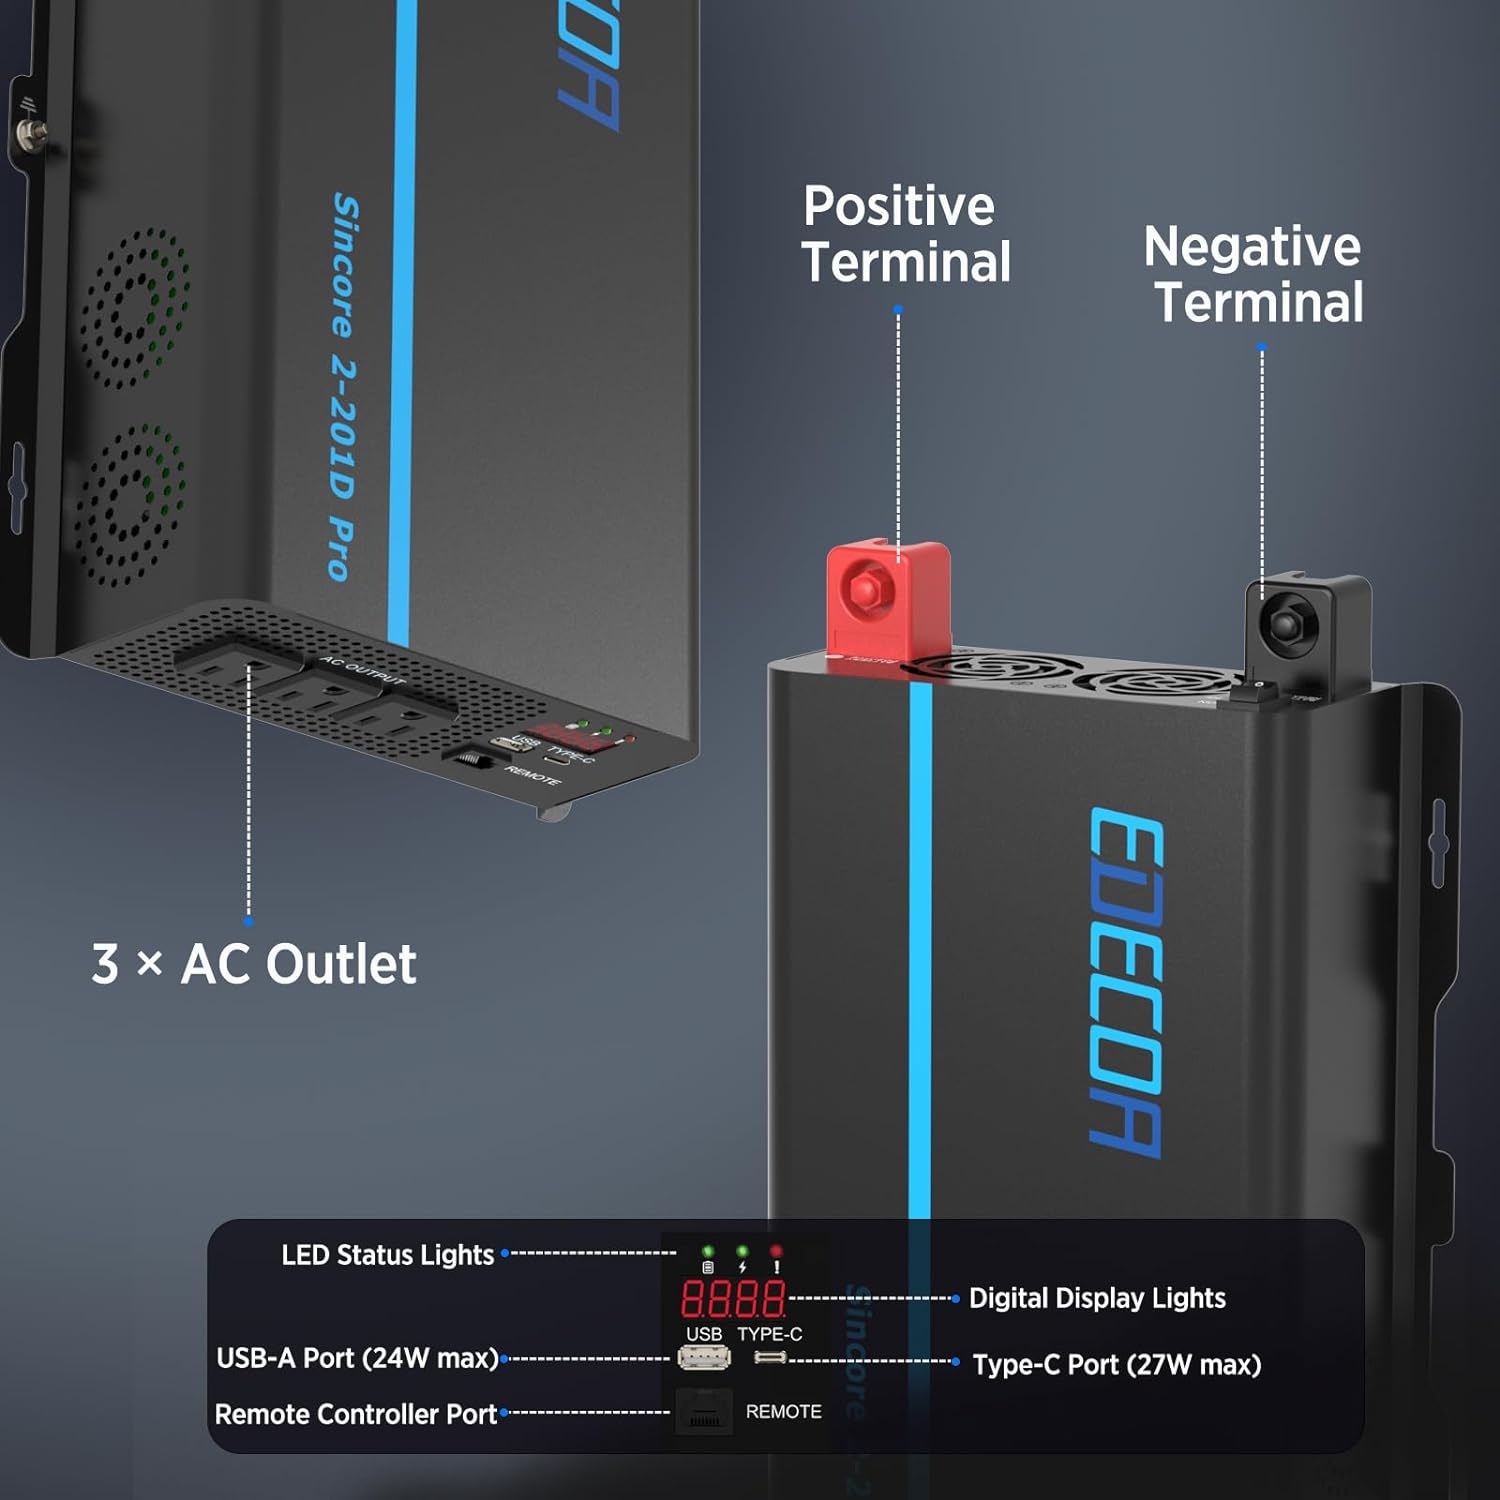 Professional Title: "2000W Pure Sine Wave Power Inverter - DC 12V to AC 110V with USB Port, Type-C Port, 2 AC Outlets, Remote Controller, LED Display - Ideal for RV, Car, Boat, and Household Use"